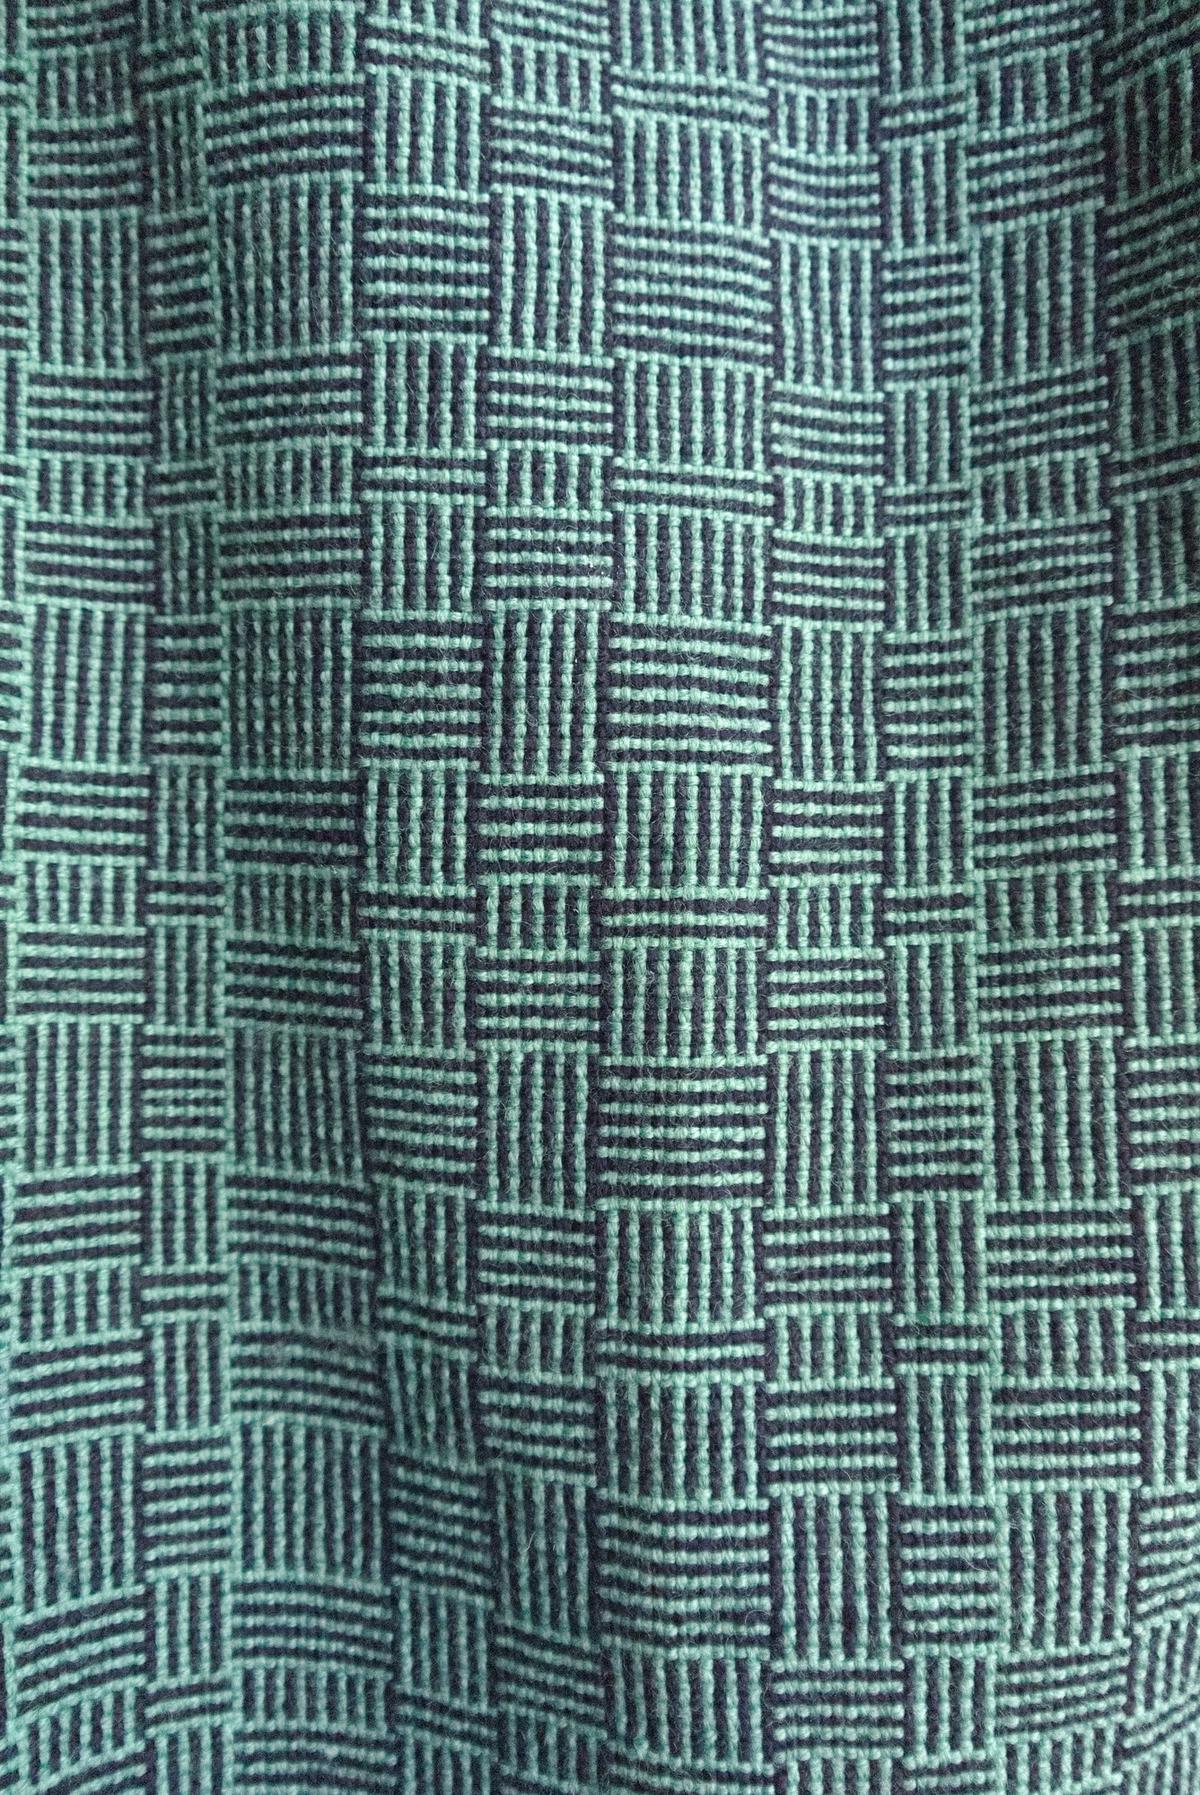 wider view of the pattern. the rows and columns look rigid and architectural, but the cloth beneath ripples softly.